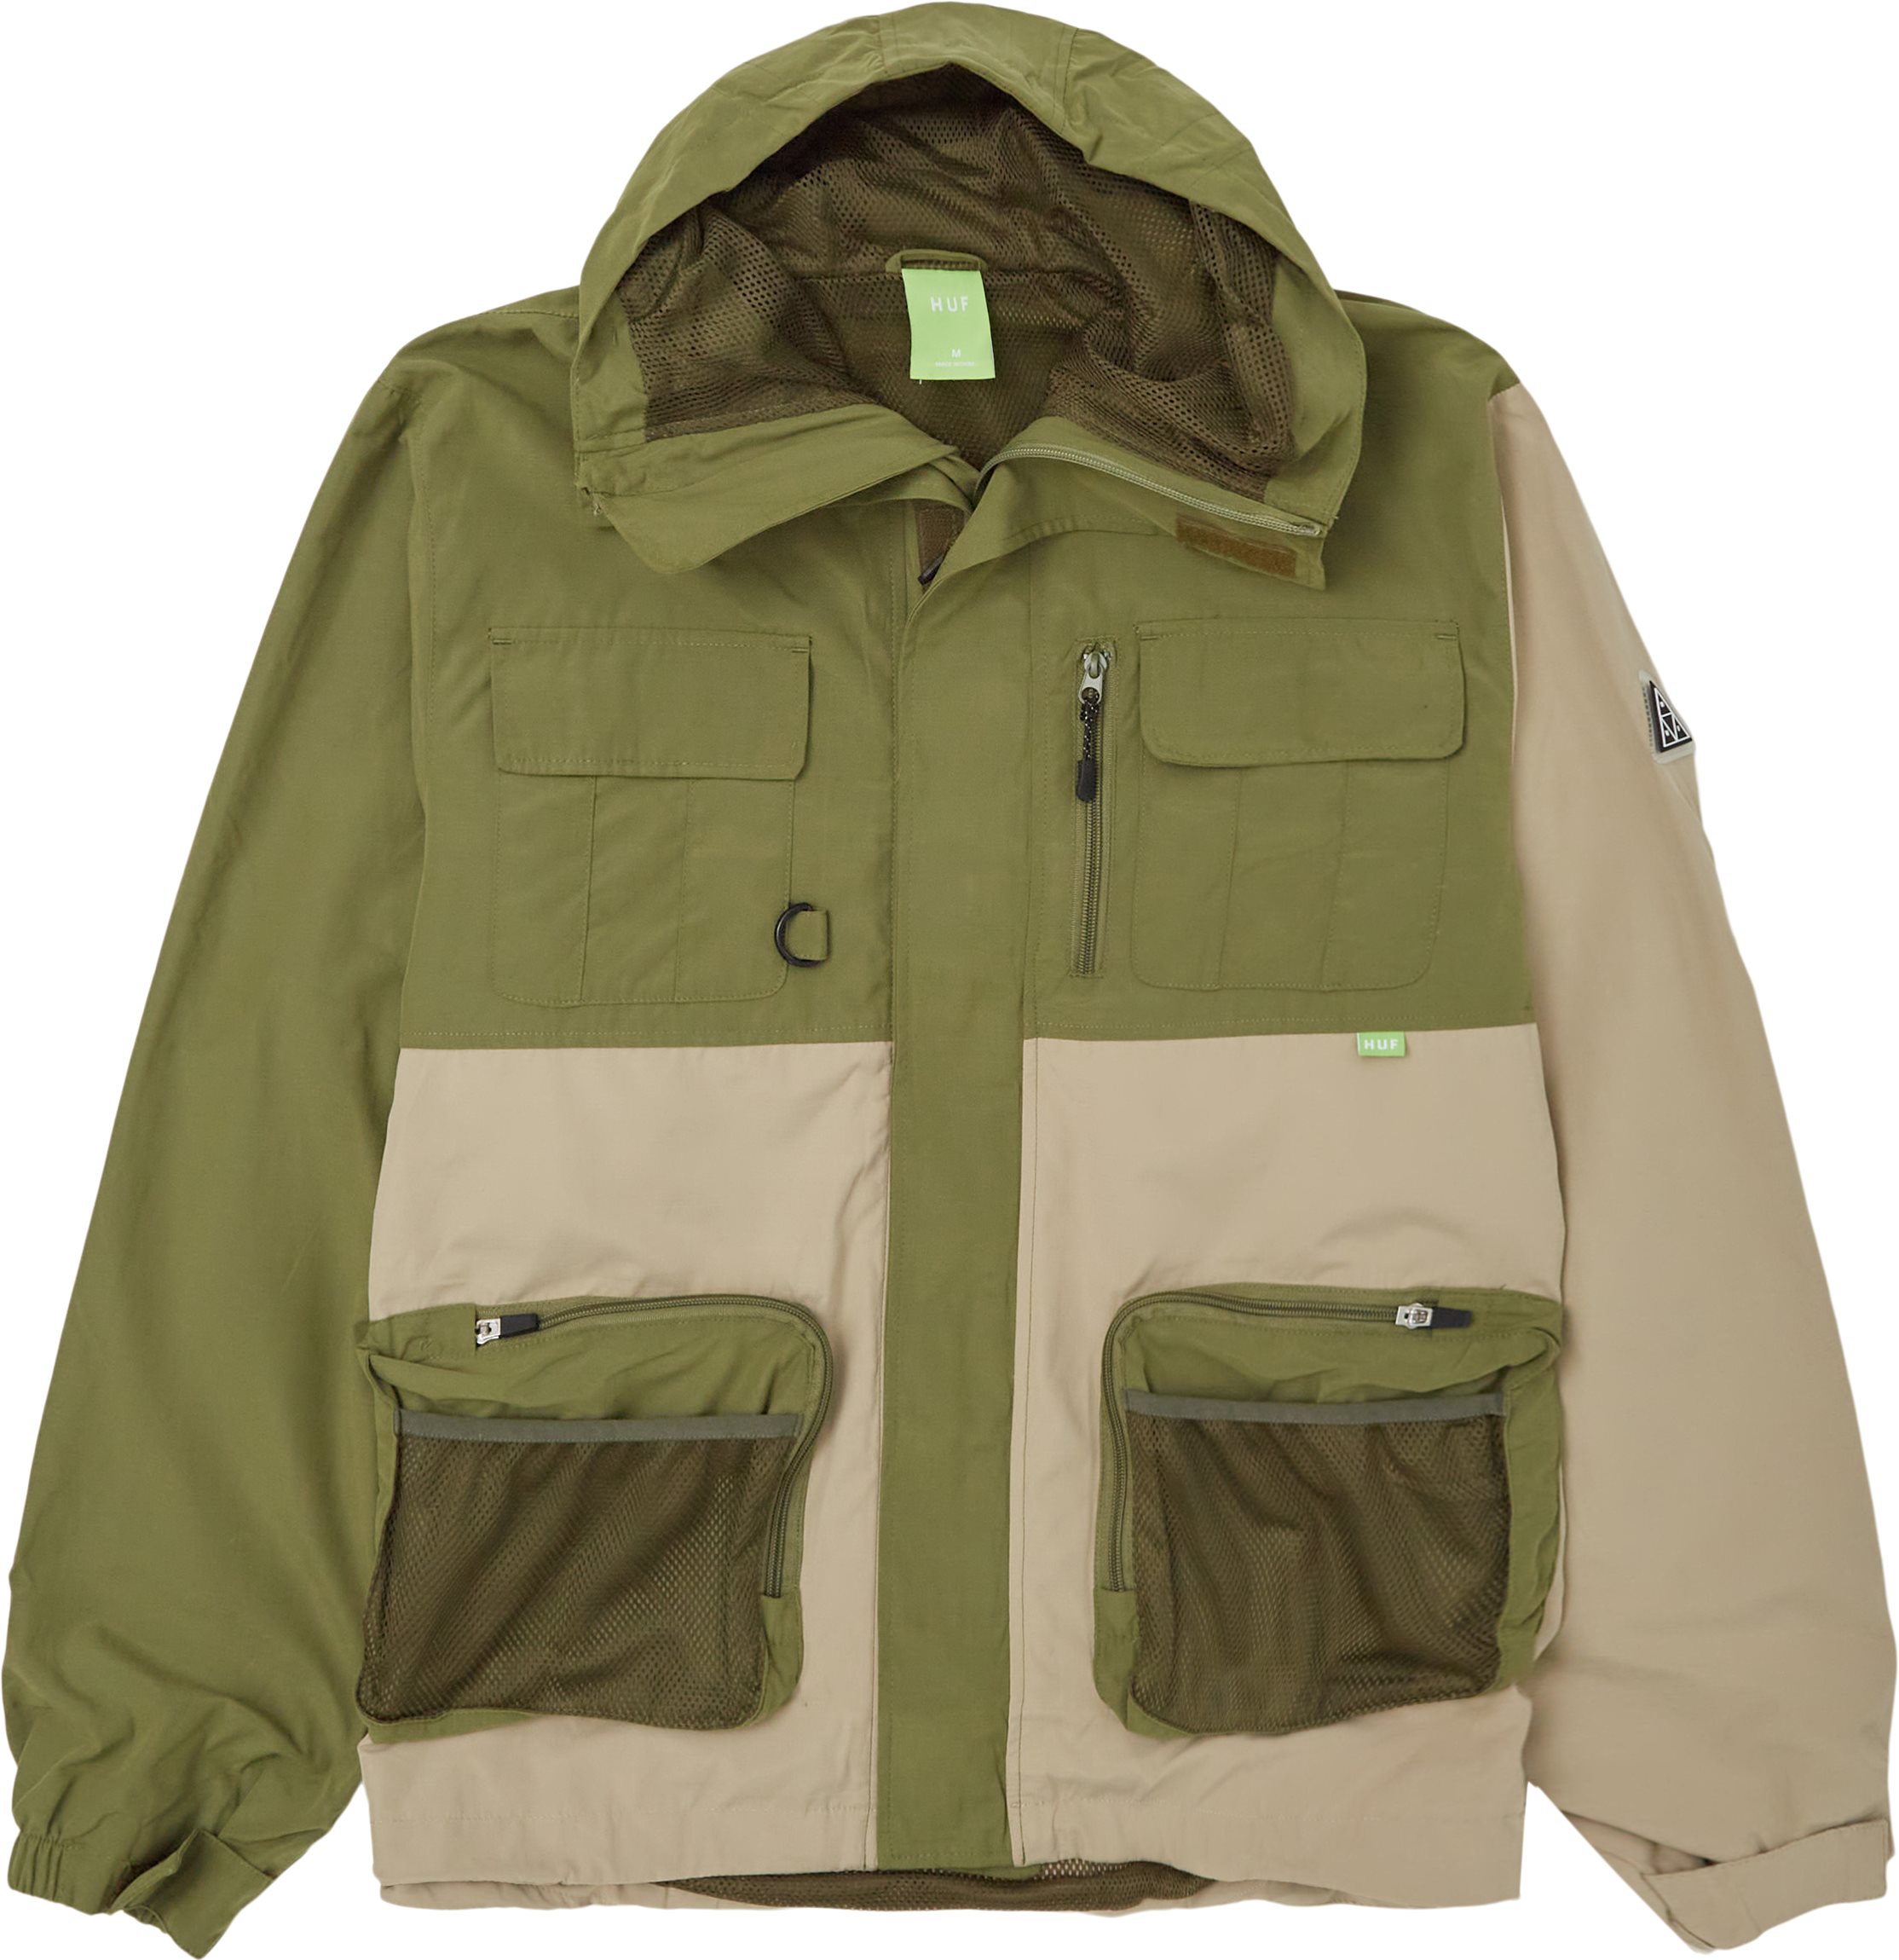 Tackle Light Weight Jacket - Jackets - Regular fit - Army